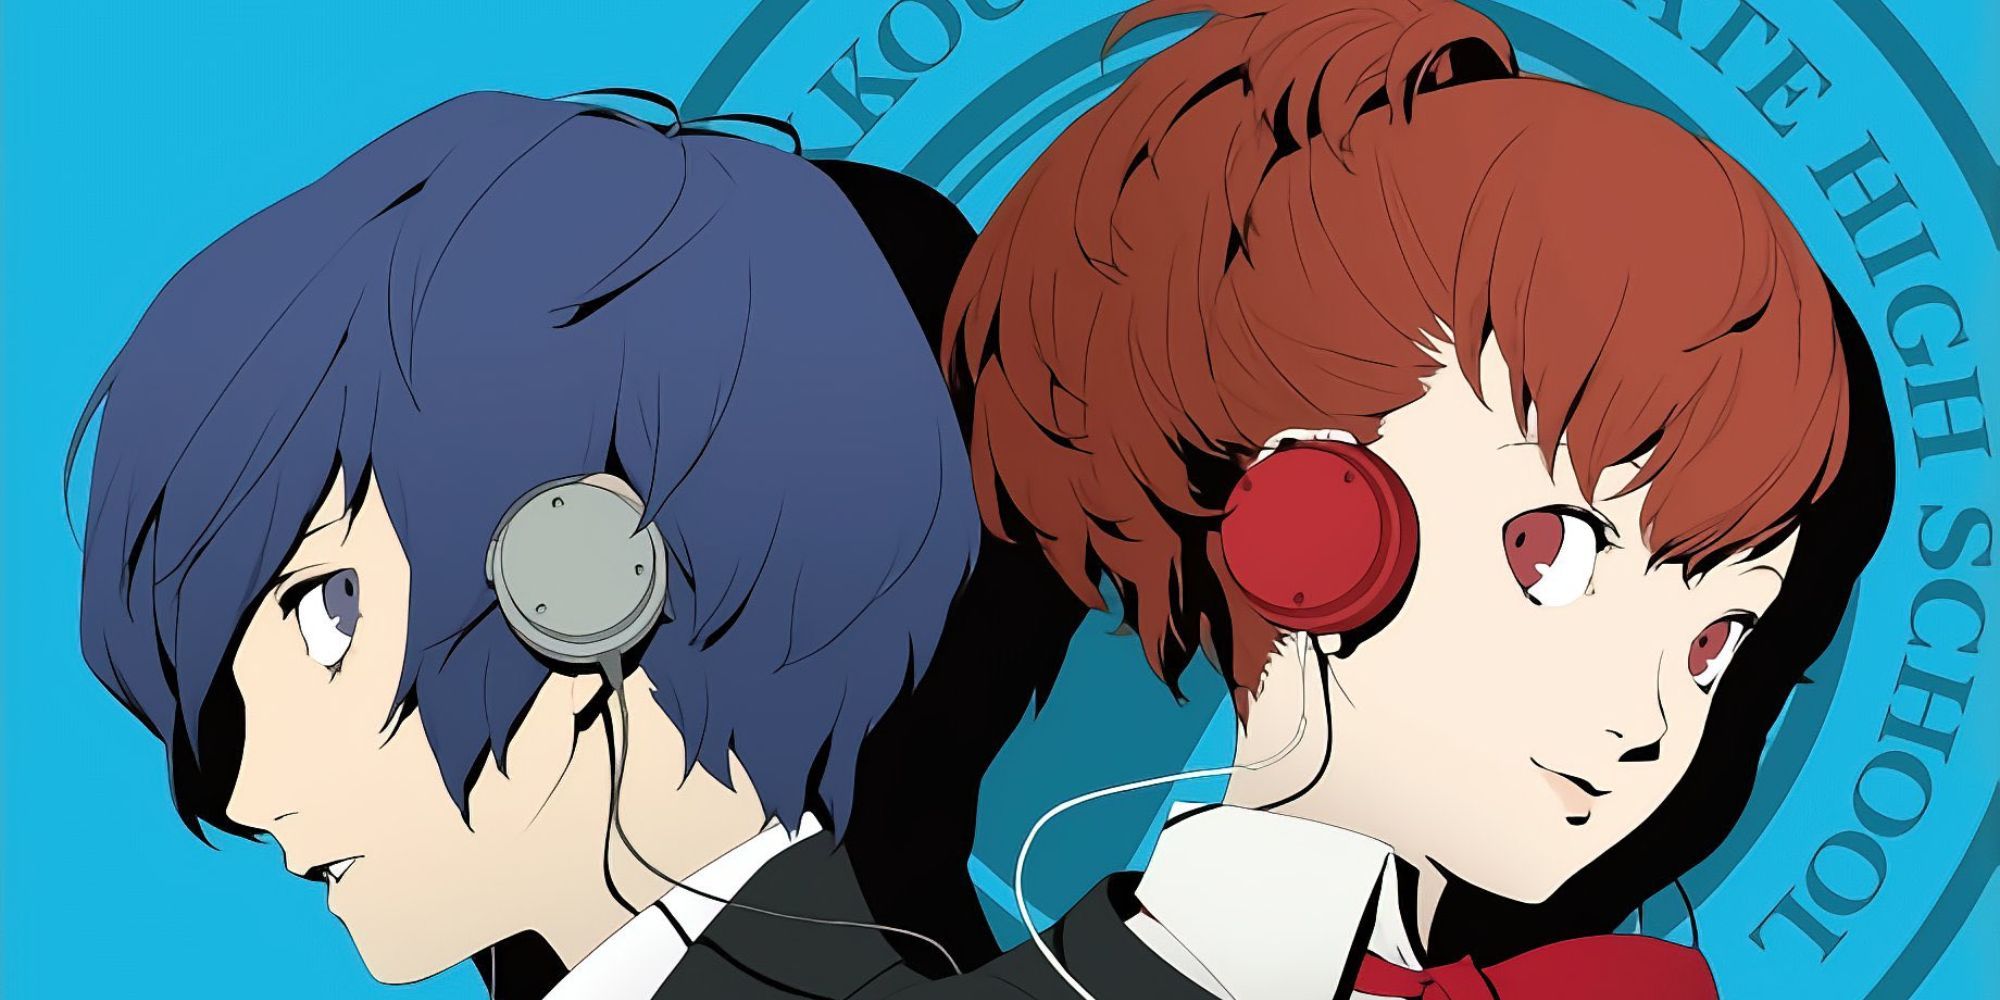 Persona 3 protagonists artwork from the Persona 25th anniversary celebration